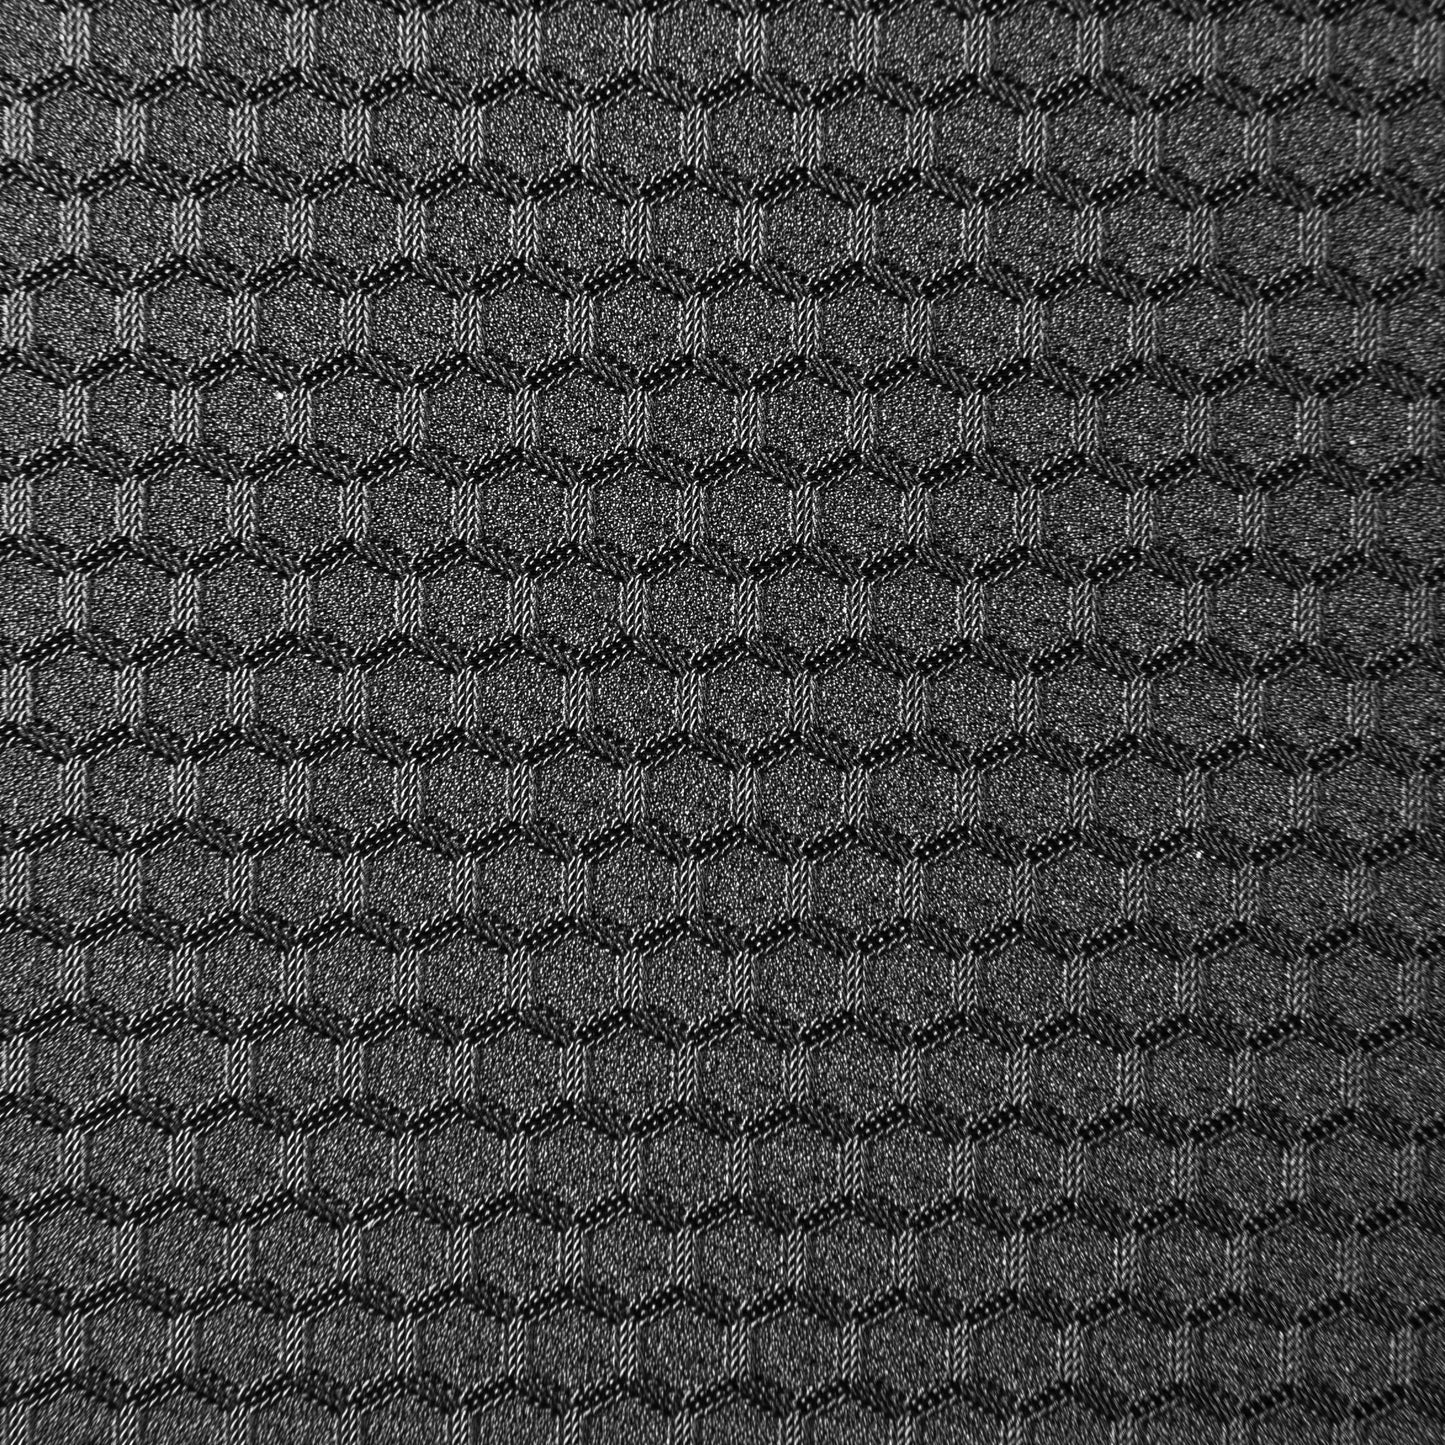 close up swatch of black minihex pattern. Hexagonal shapes 